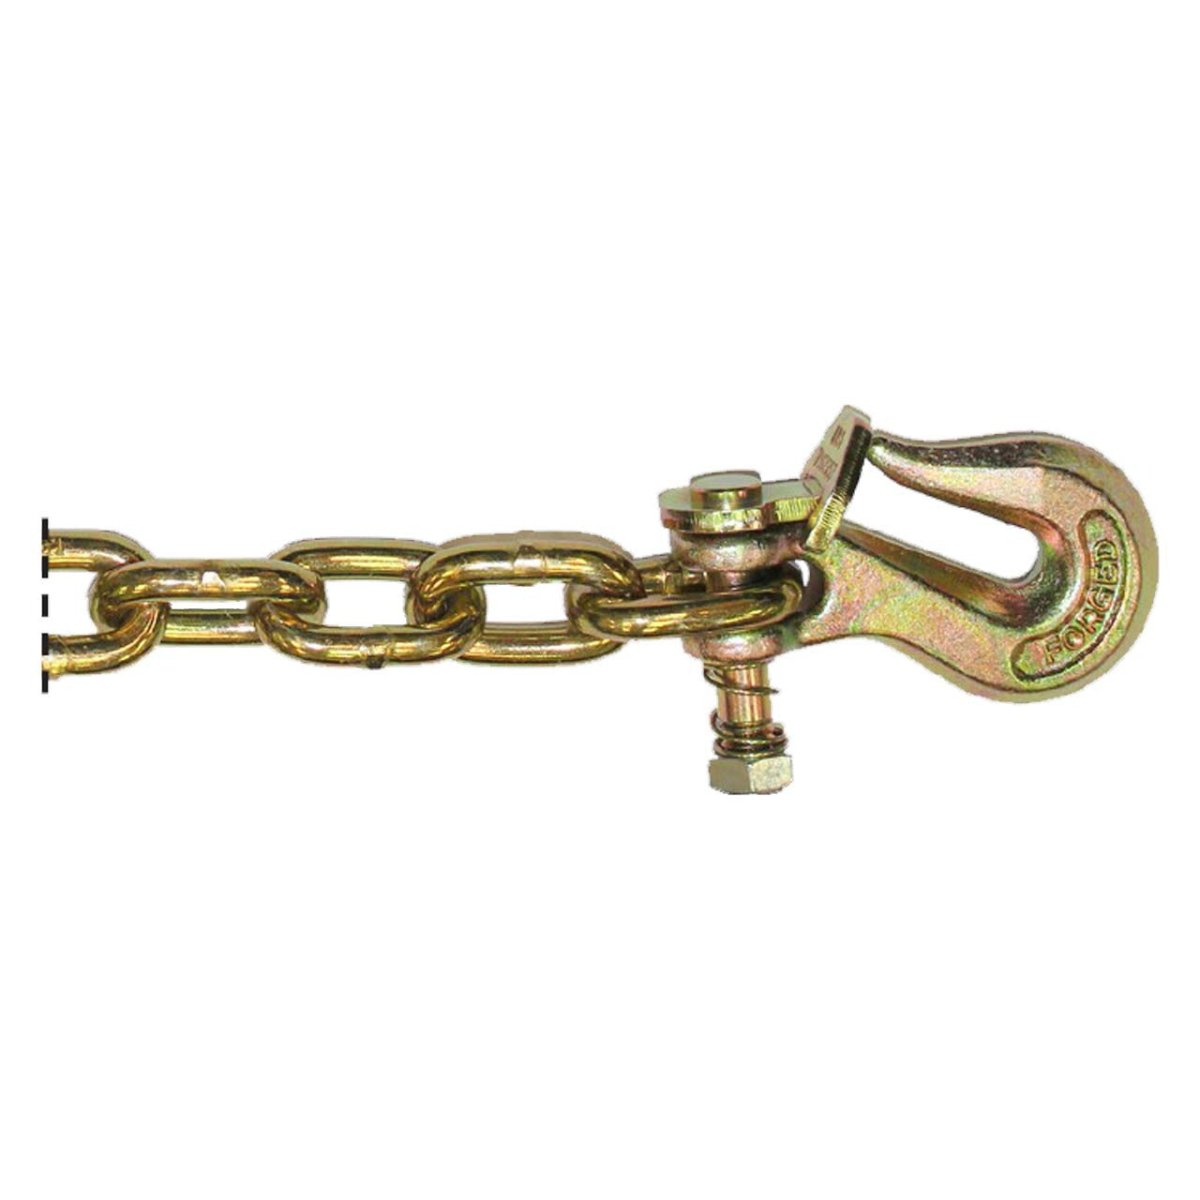 B/A Products Co. 3/8" x 10' Chain w/Twist Lock™ Grab Hook on One End - G7-3810ST - starequipmentsales